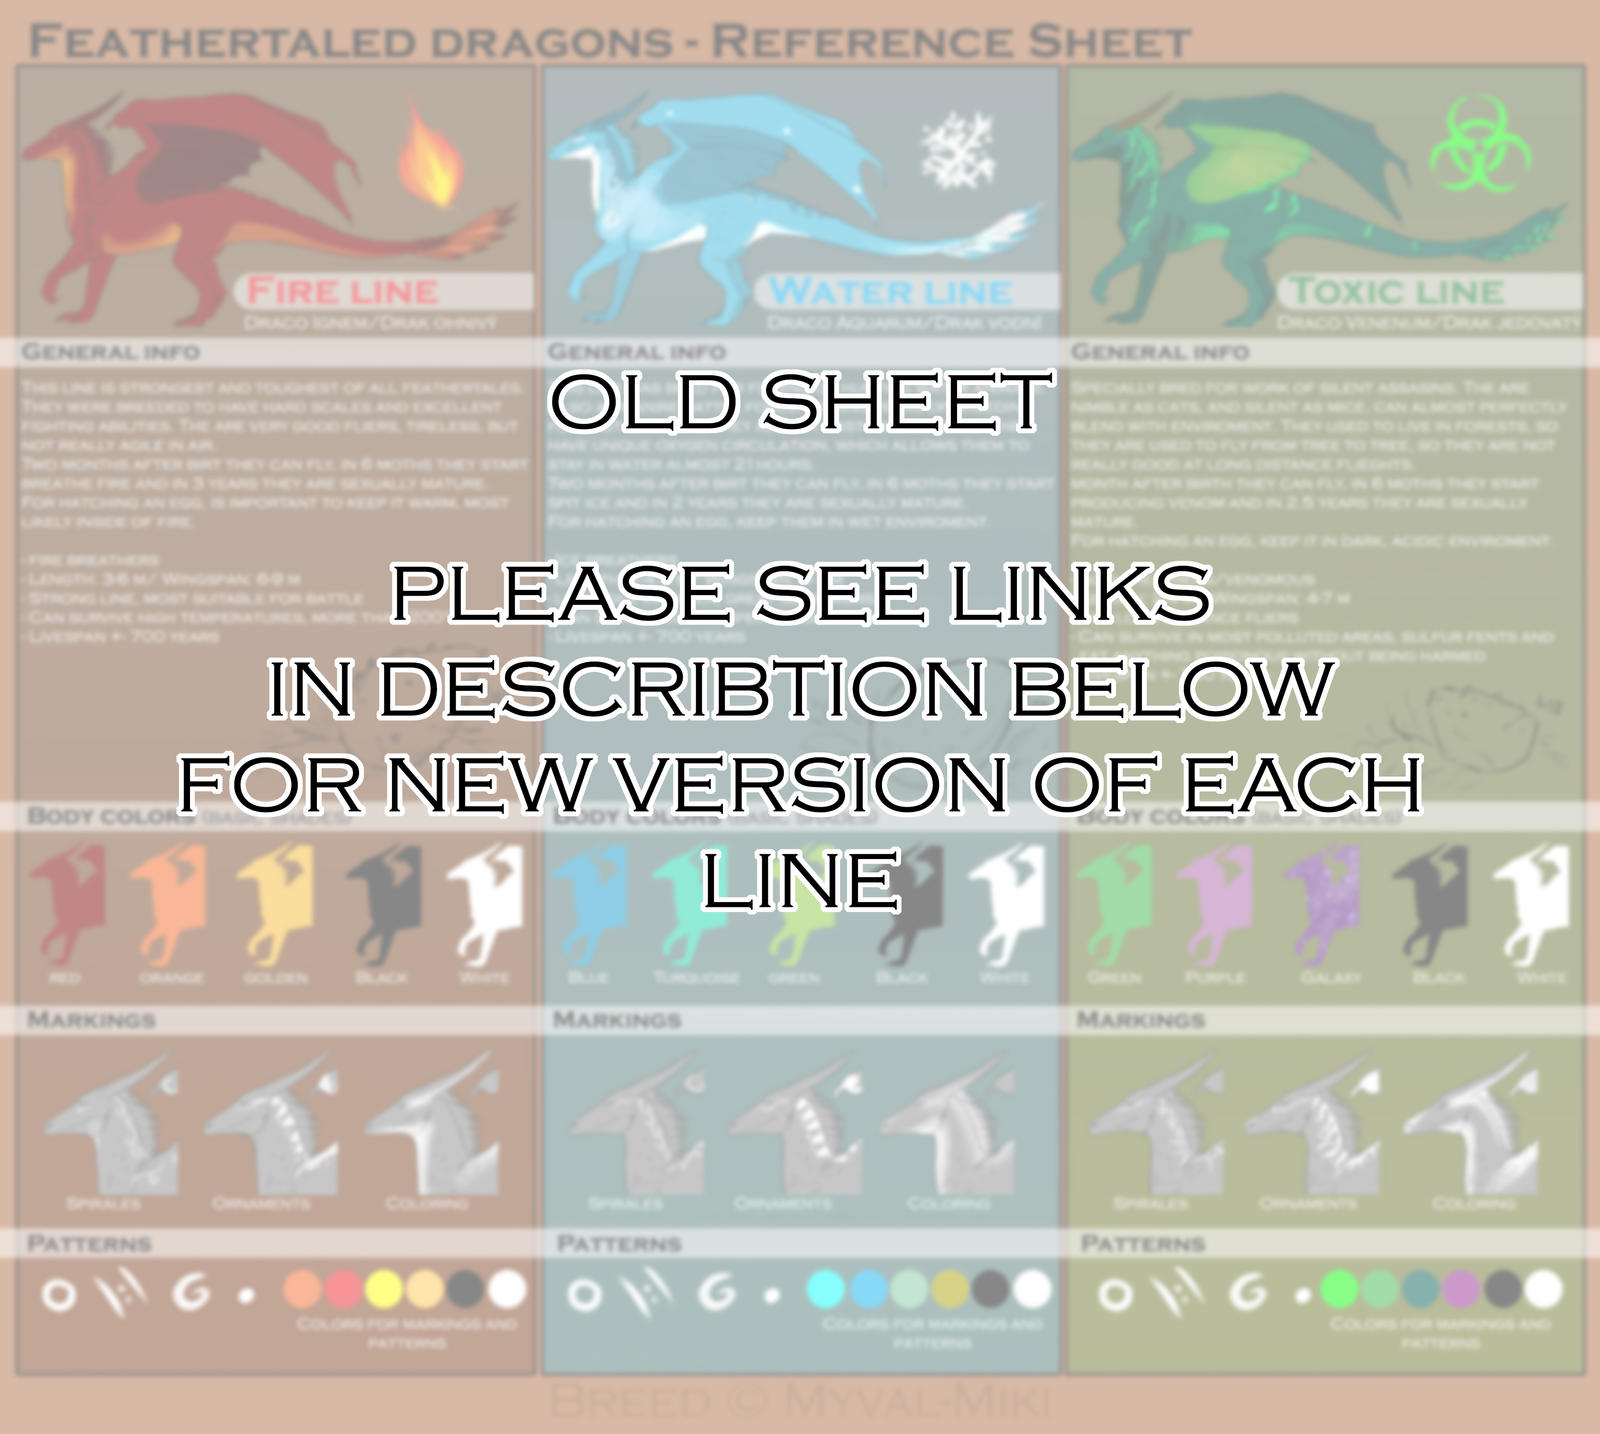 Feathertaled dragons - Breed reference